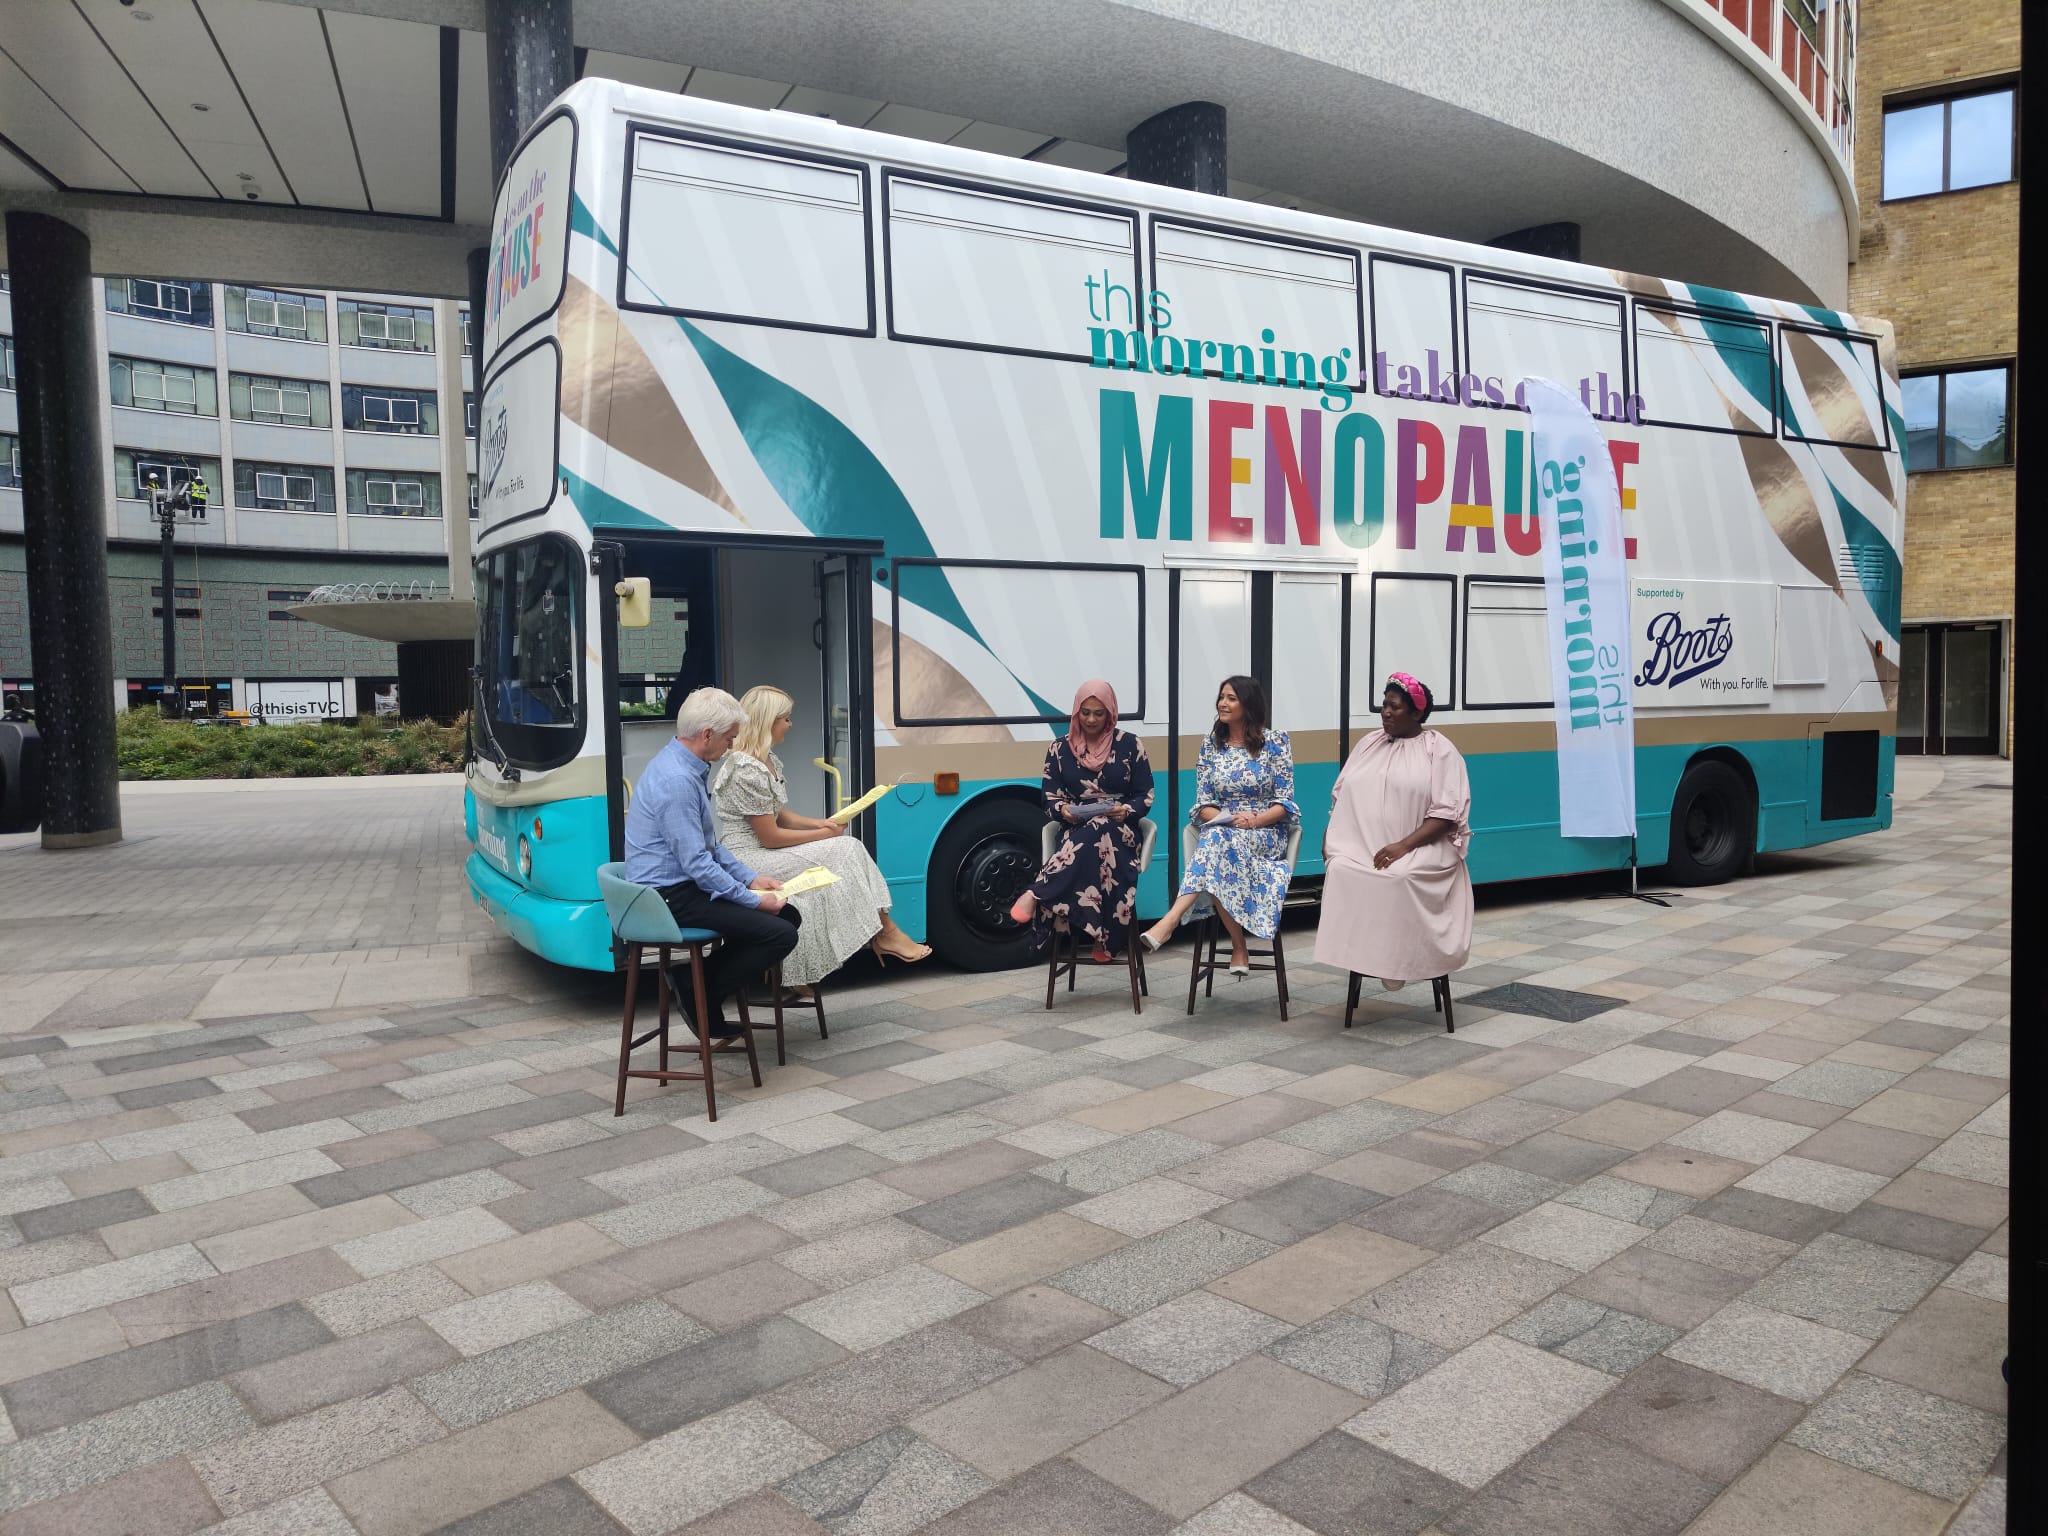 Double Decker Bus White Teal Turqouise ITV Boots This Morning Menopause Red Double Decker Holly Willughby Phillip Schofield